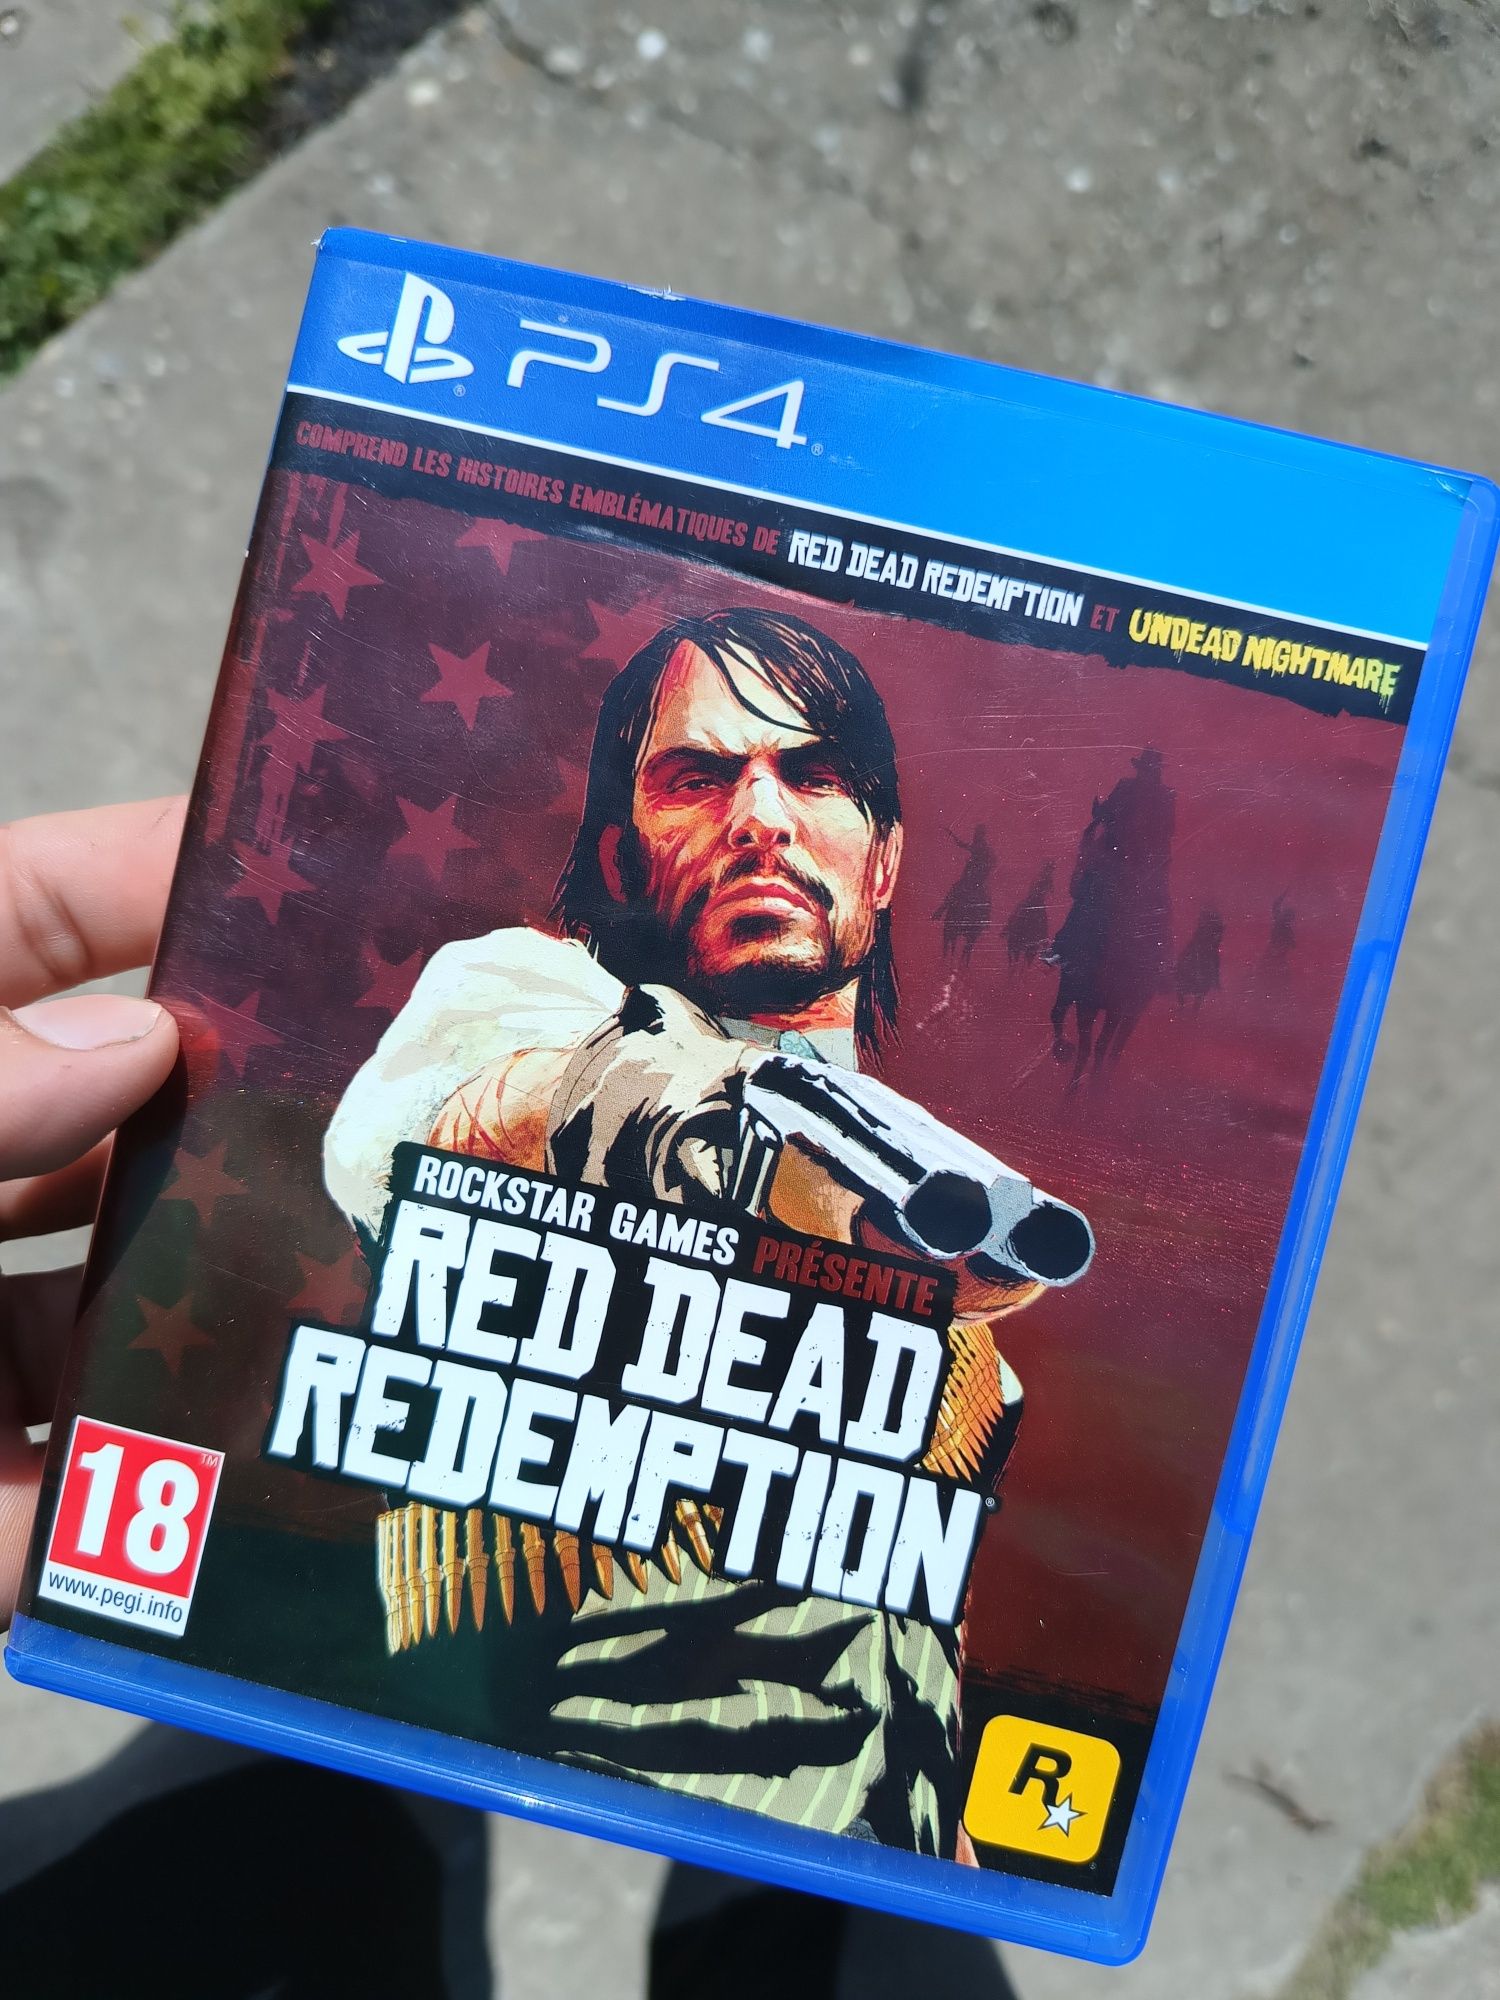 Red dead redemption 1